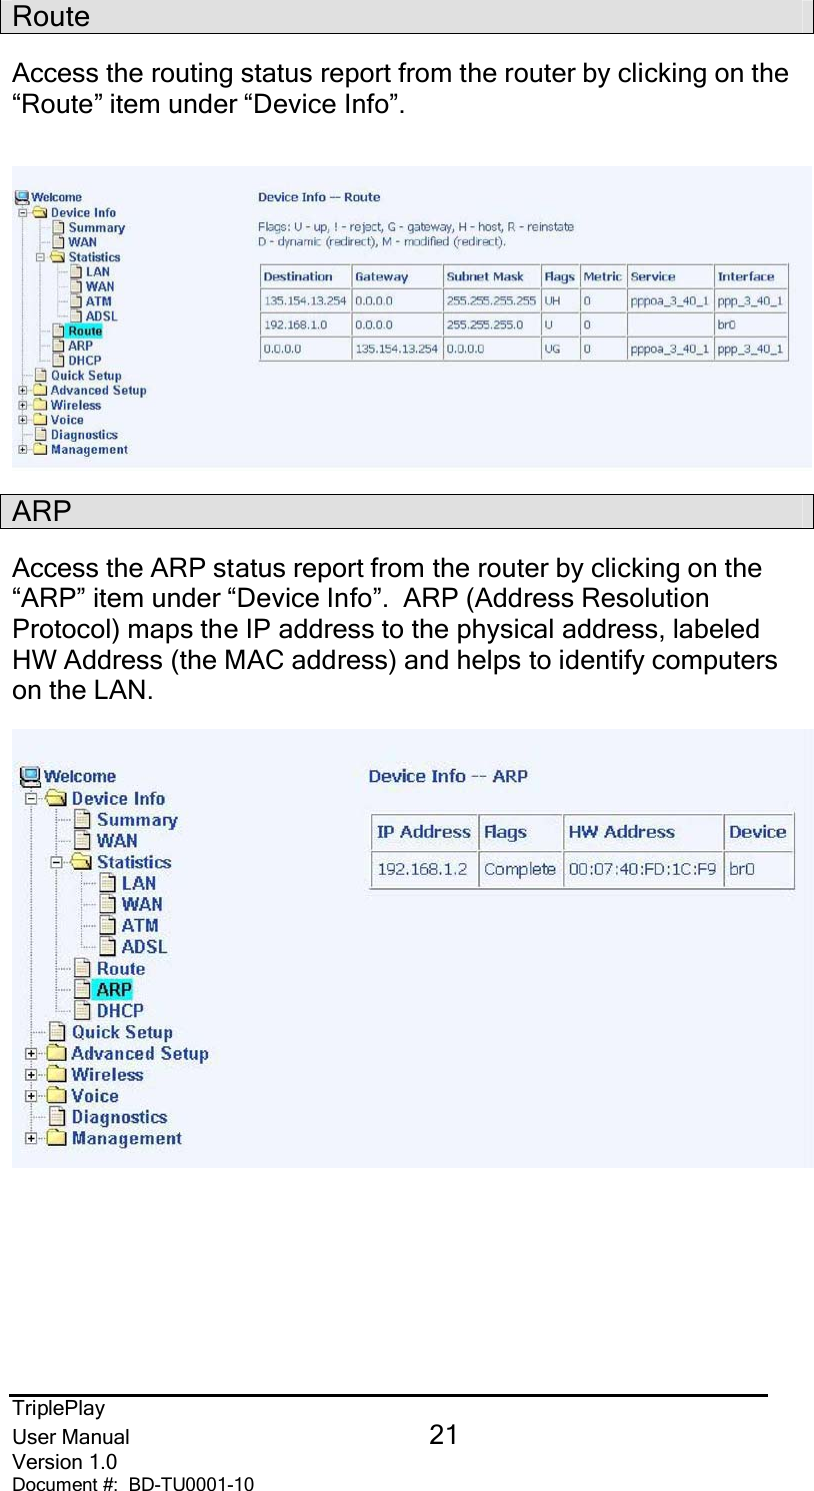 TriplePlayUser Manual 21Version 1.0Document #:  BD-TU0001-10RouteAccess the routing status report from the router by clicking on the“Route” item under “Device Info”.ARPAccess the ARP status report from the router by clicking on the“ARP” item under “Device Info”.  ARP (Address ResolutionProtocol) maps the IP address to the physical address, labeledHW Address (the MAC address) and helps to identify computerson the LAN.